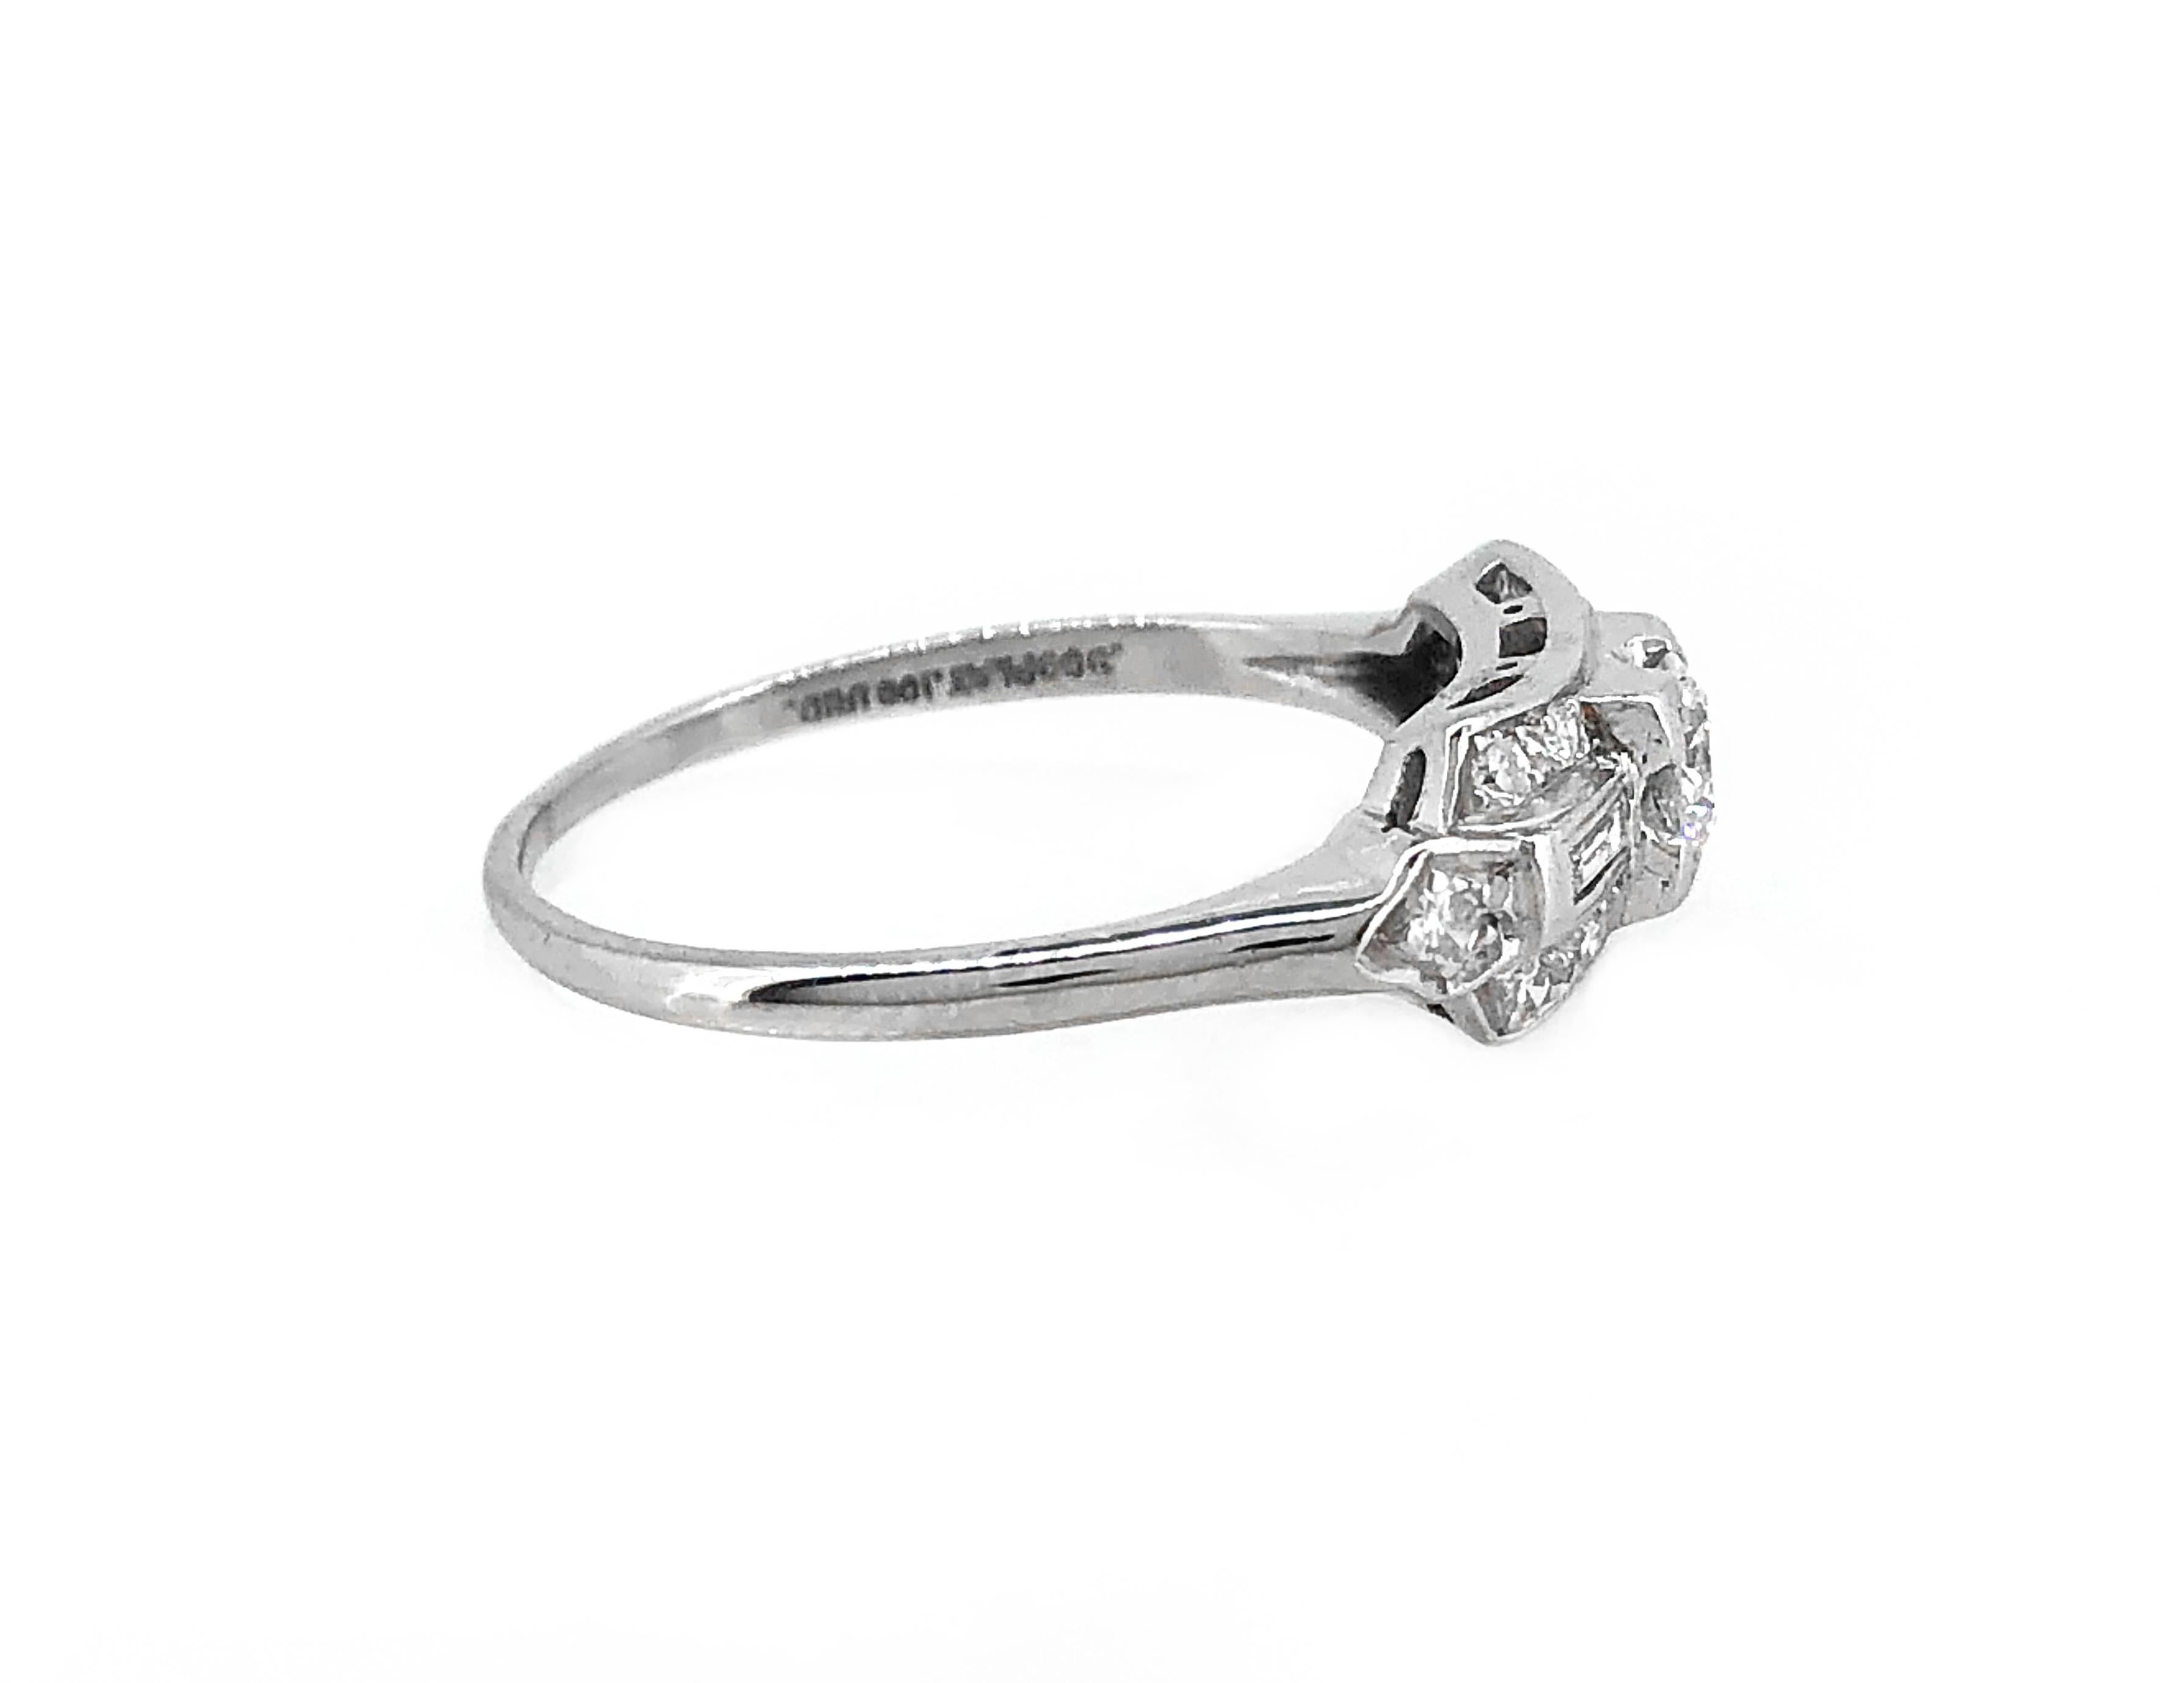 A sizzling Art Deco diamond Antique engagement or fashion ring that features a scintillating .33ct. apx. transitional cut diamond with fantastic VS2 clarity and G color. Baguette and single cut diamonds weighing .25ct. apx. T.W. decorate this lovely